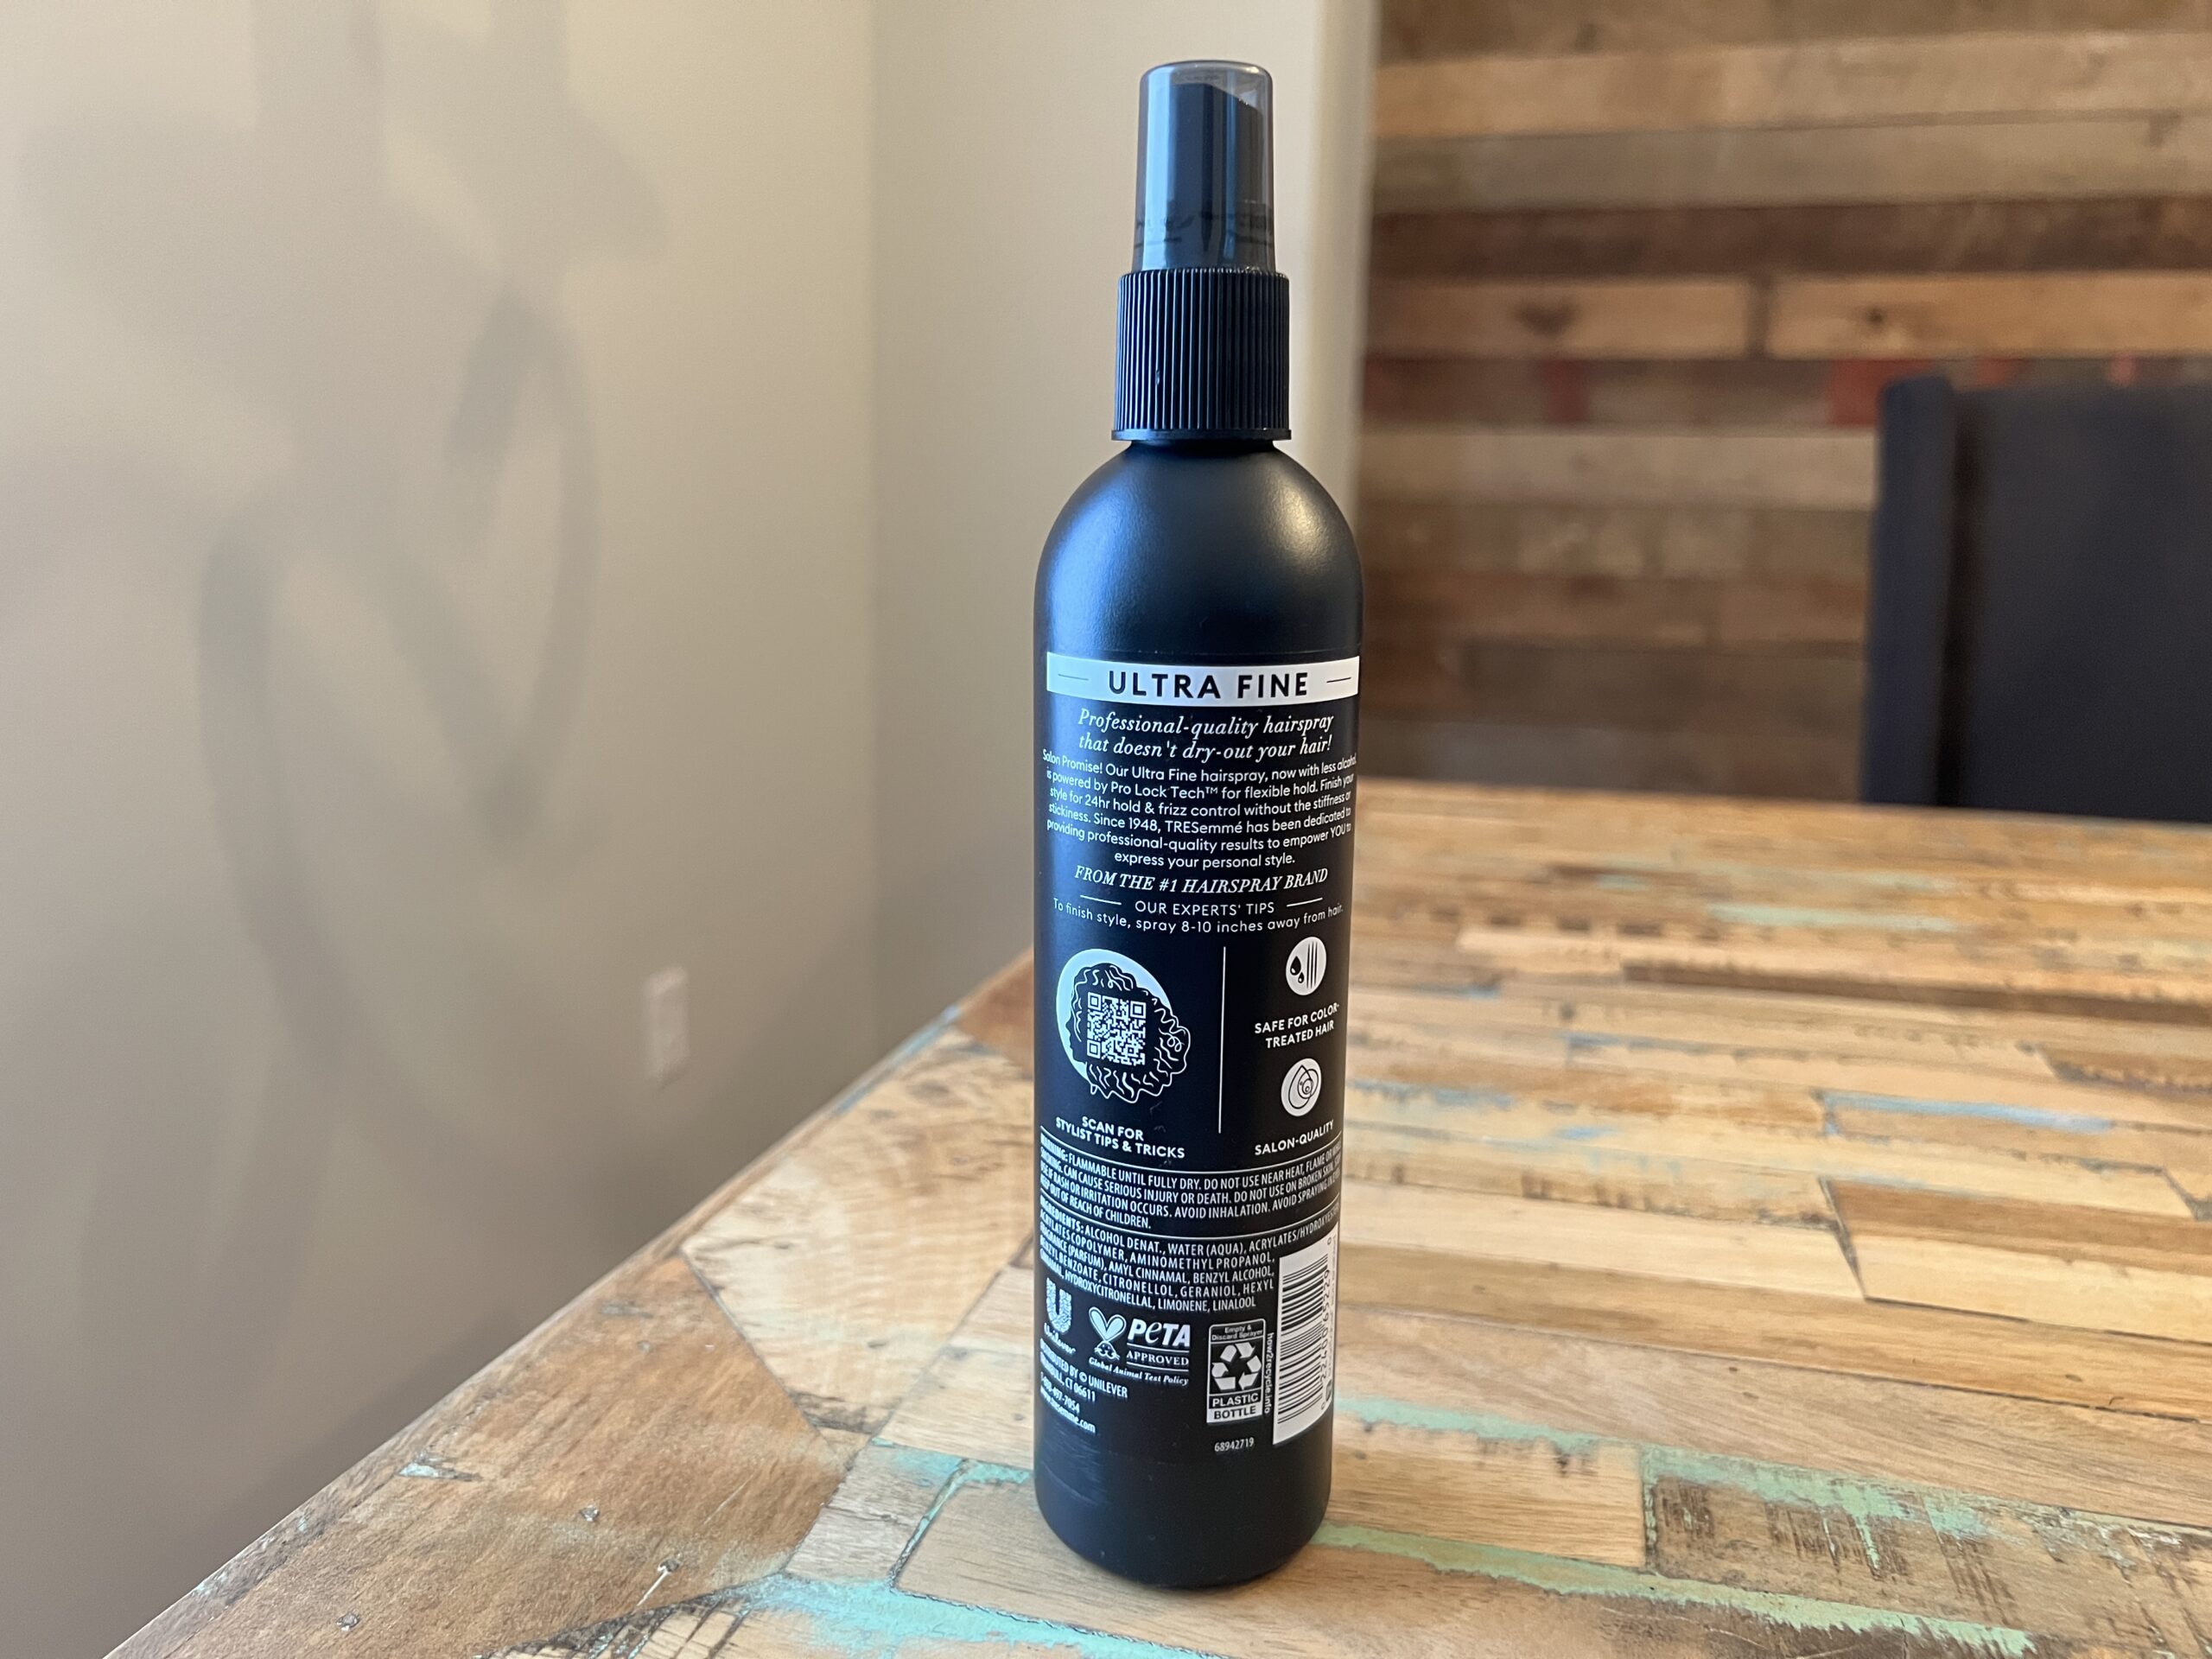 TRESemmé Used by Professionals is an ultra-fine professional-quality hairspray that doesn't dry out your hair!